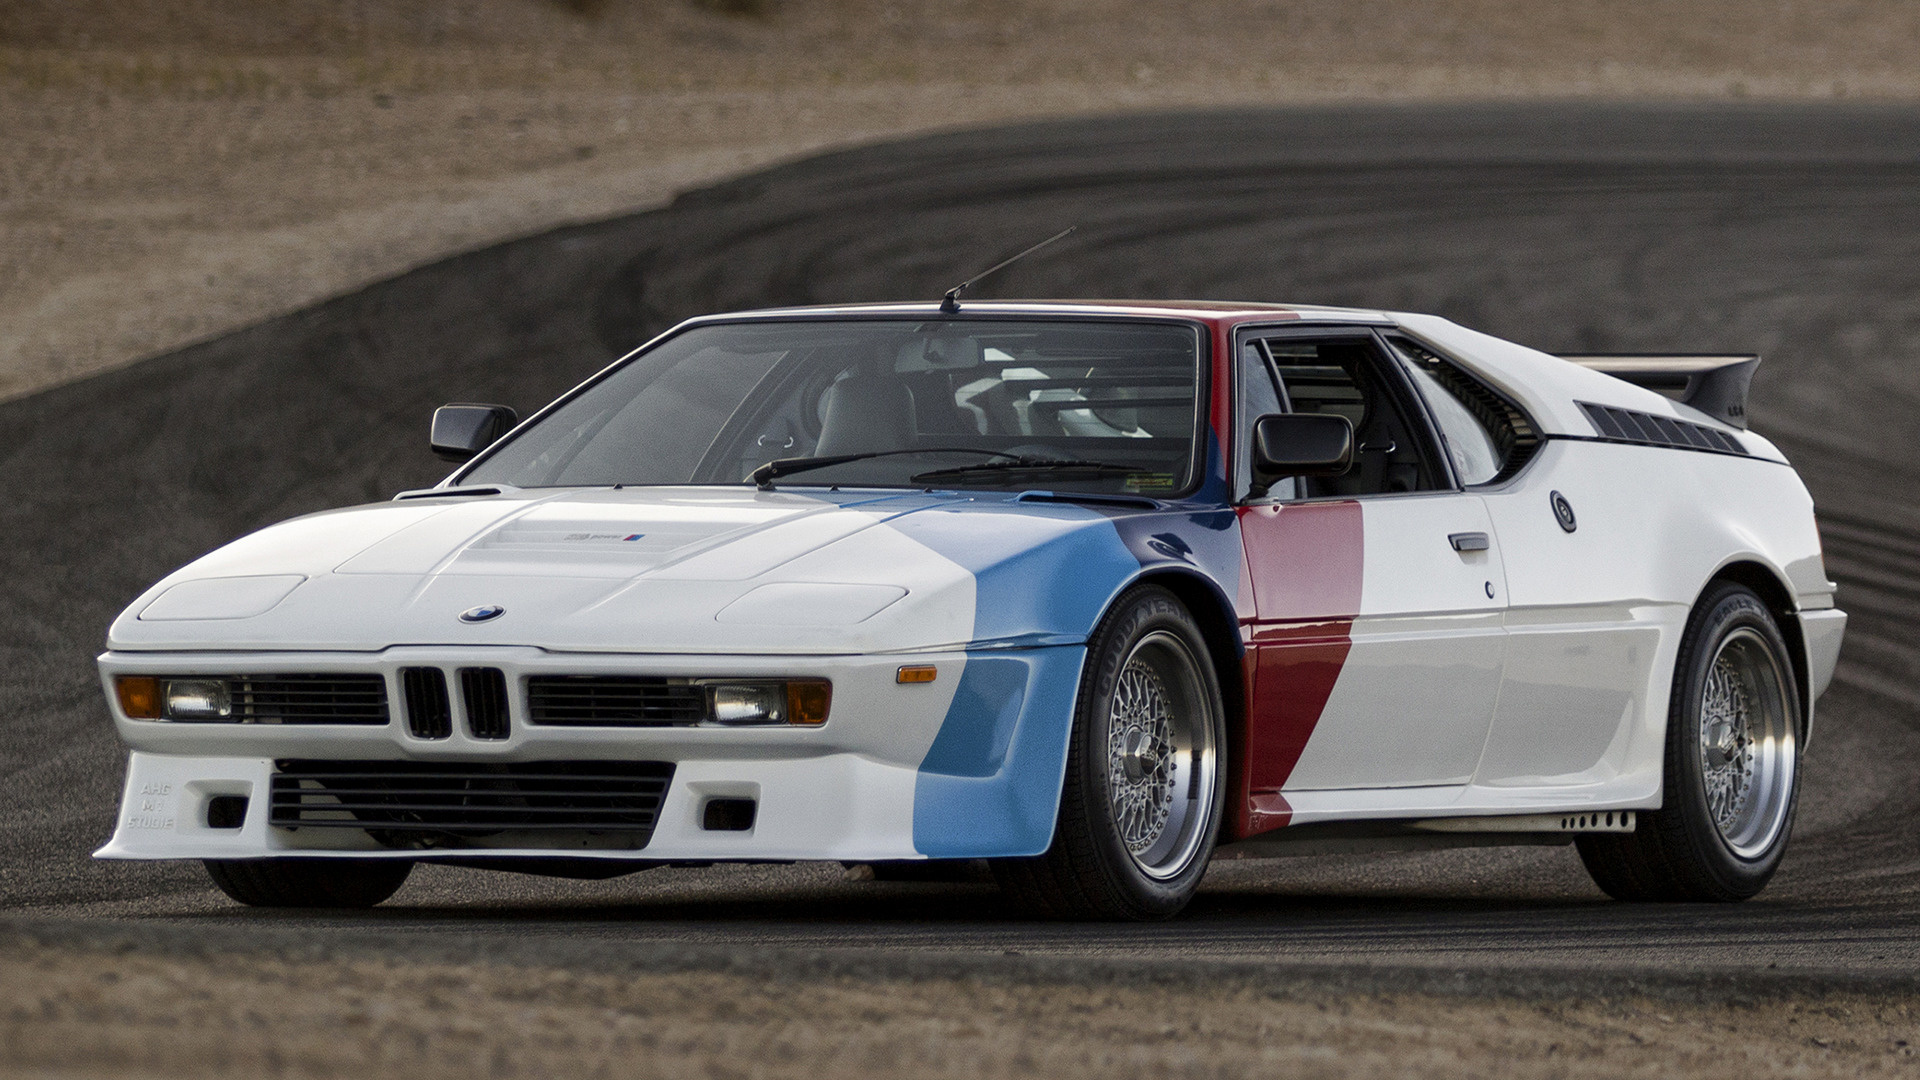 1979 BMW M1 Procar by AHG - Wallpapers and HD Images | Car ...